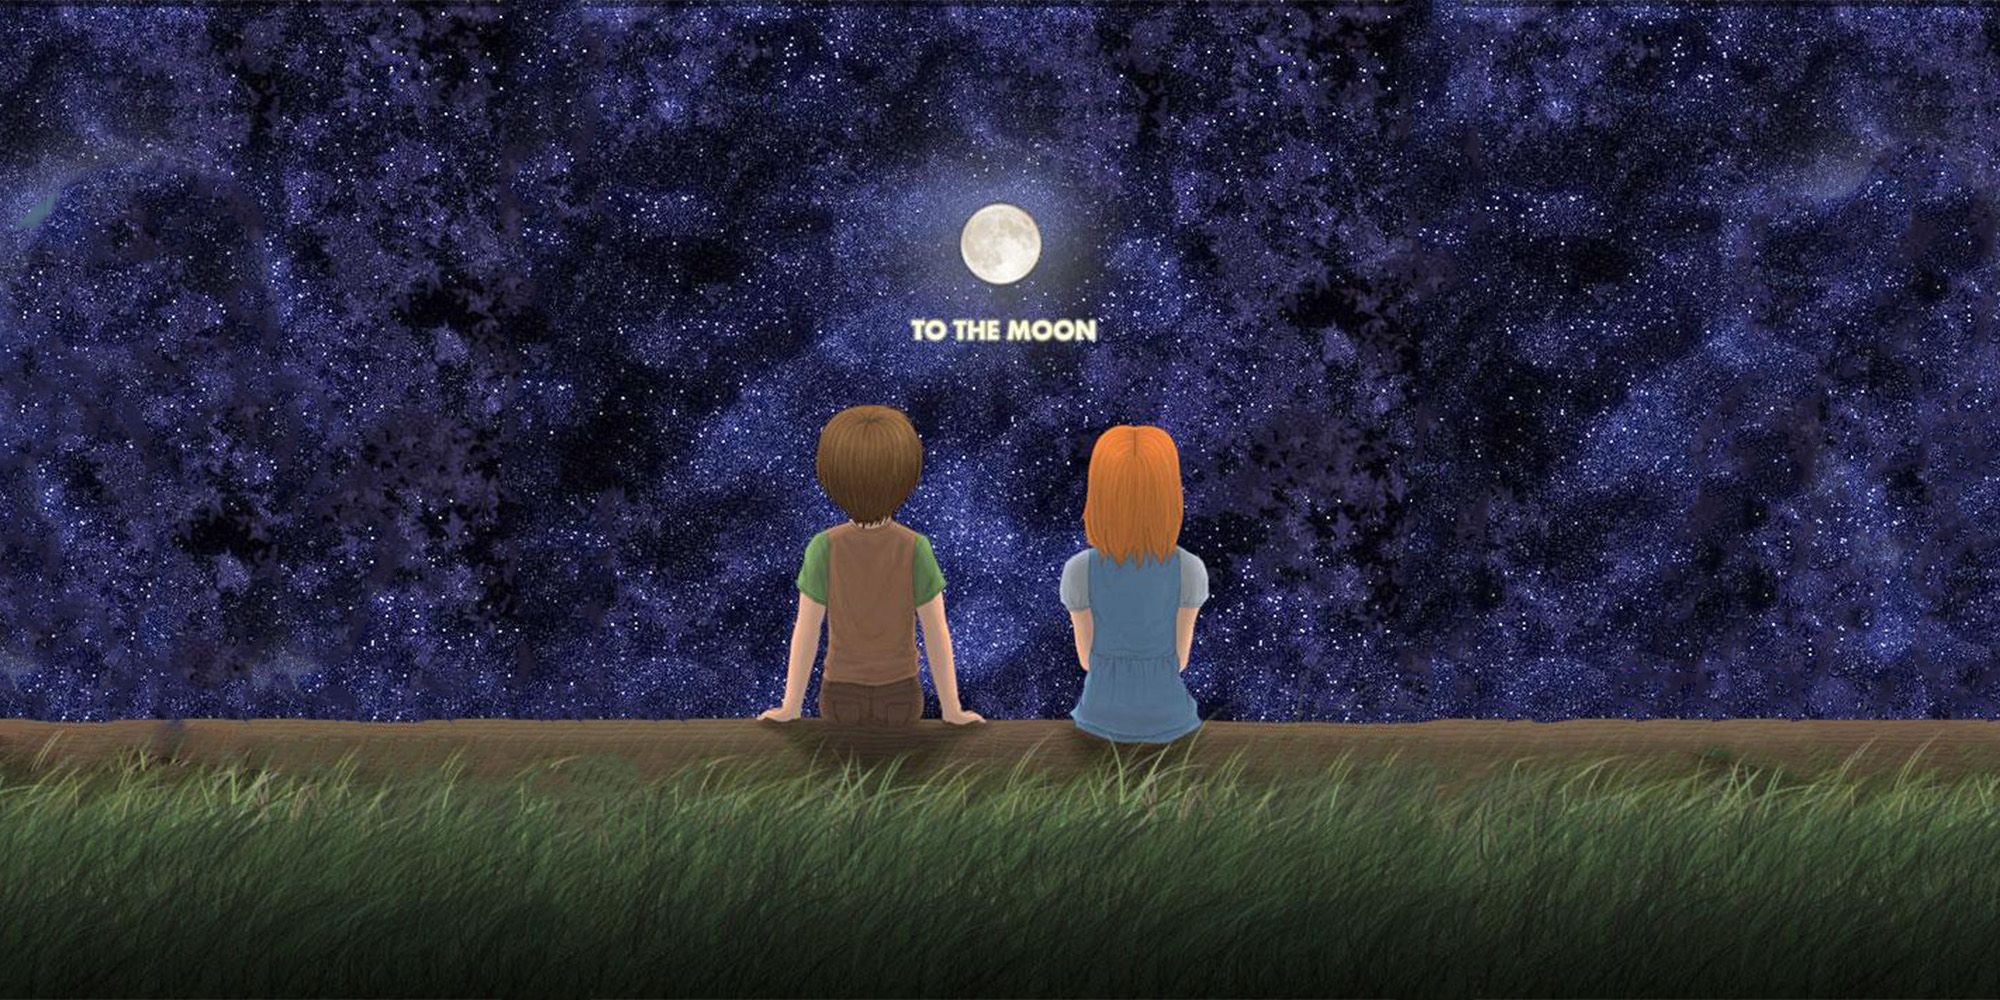 To The Moon cover art Featuring Johnny and River sitting together under the stars